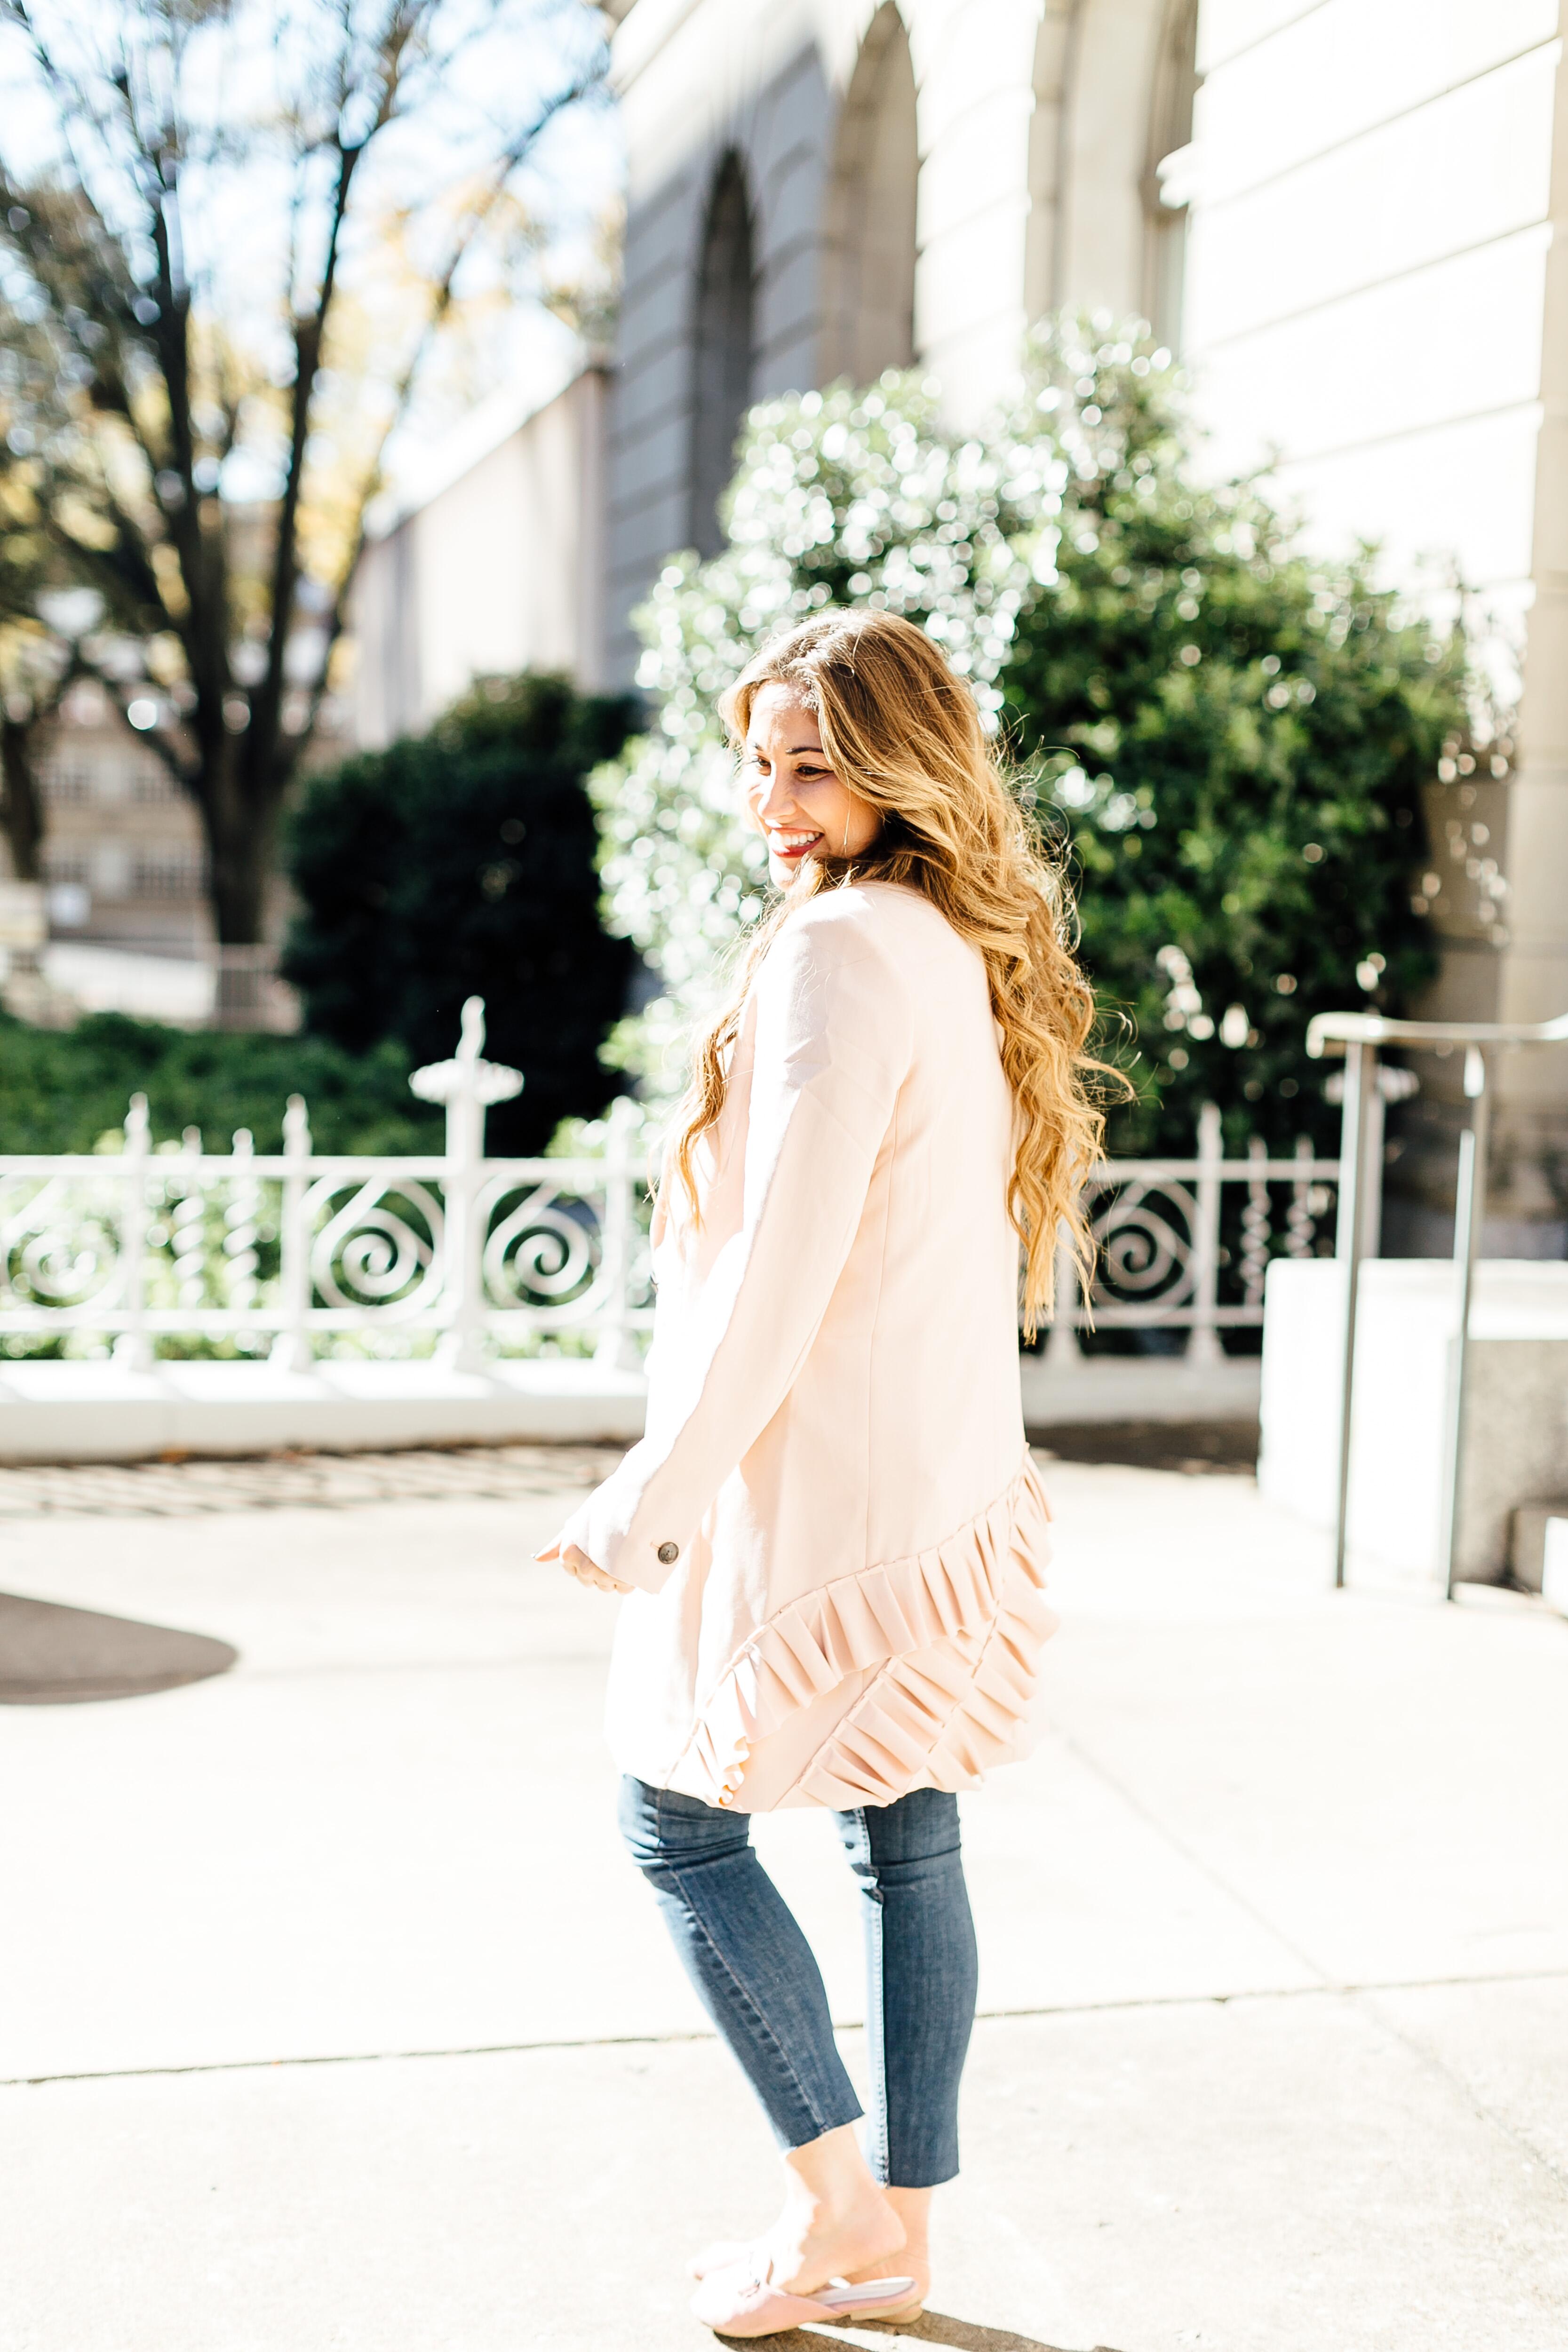 Trend Spin Linkup: Pink Ruffle Coat from Banana Republic by East Memphis fashion blogger Walking in Memphis in High Heels